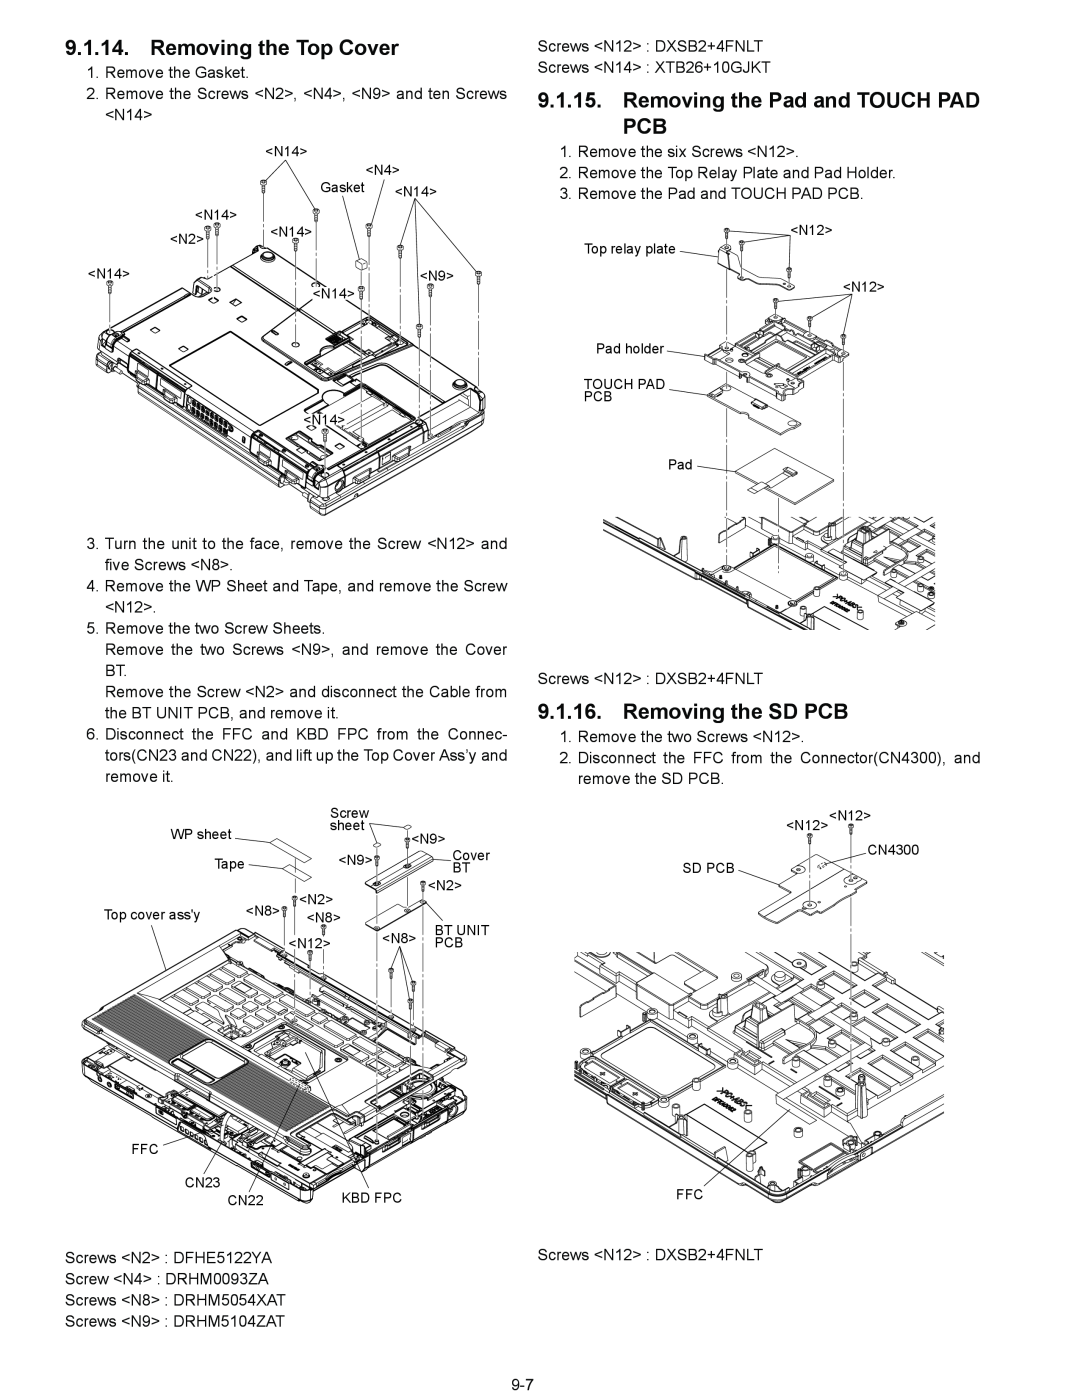 Panasonic CF-52EKM 1 D 2 M service manual Removing the Top Cover, Removing the Pad and TOUCH PAD PCB, Removing the SD PCB 